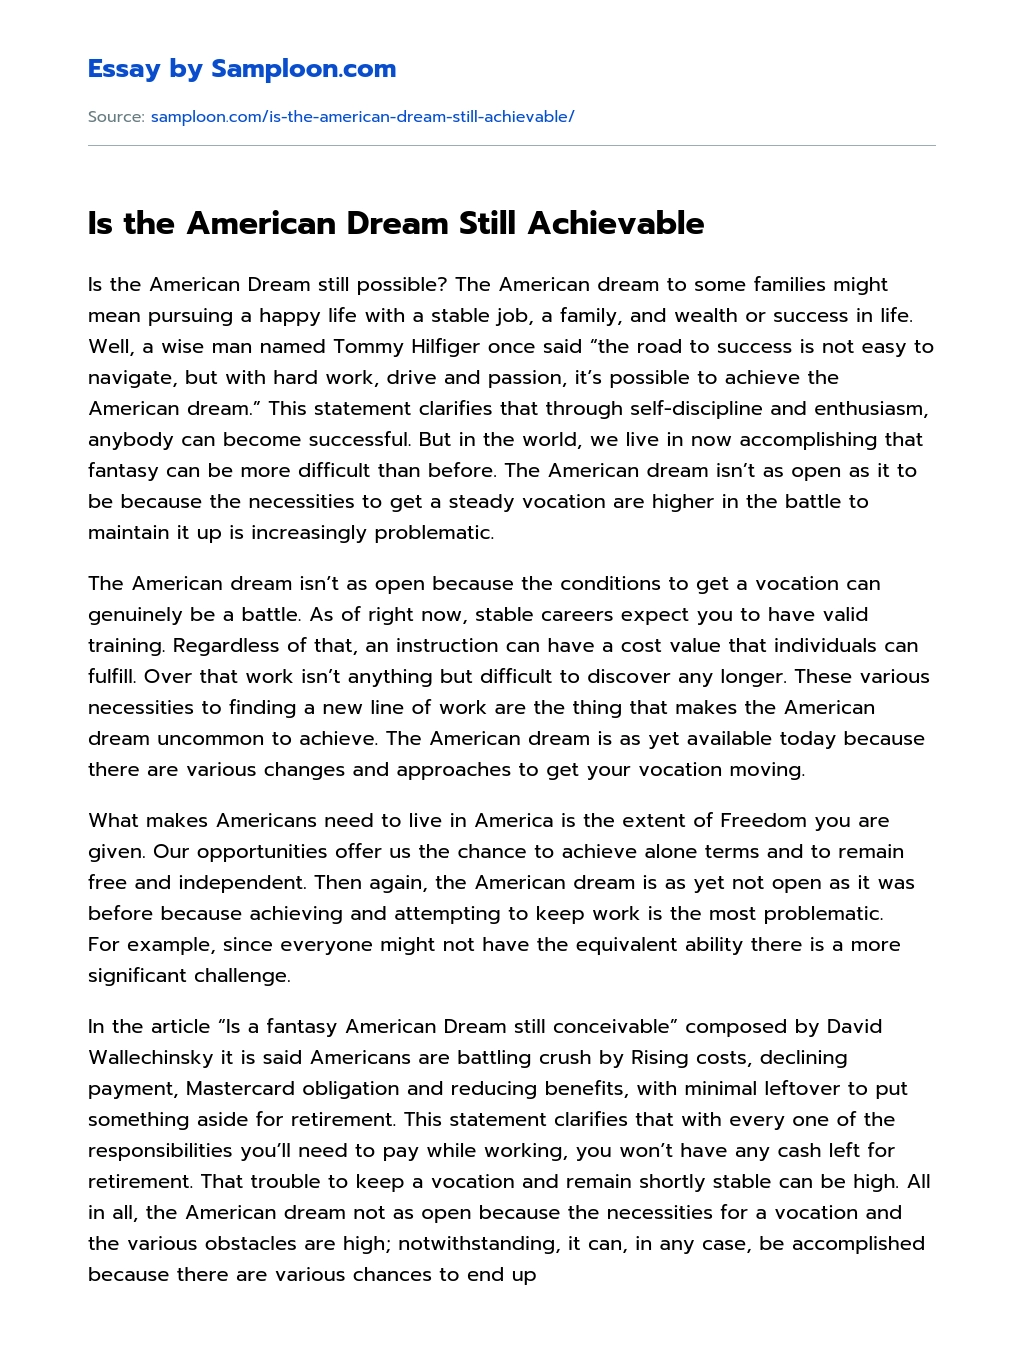 Is the American Dream Still Achievable essay